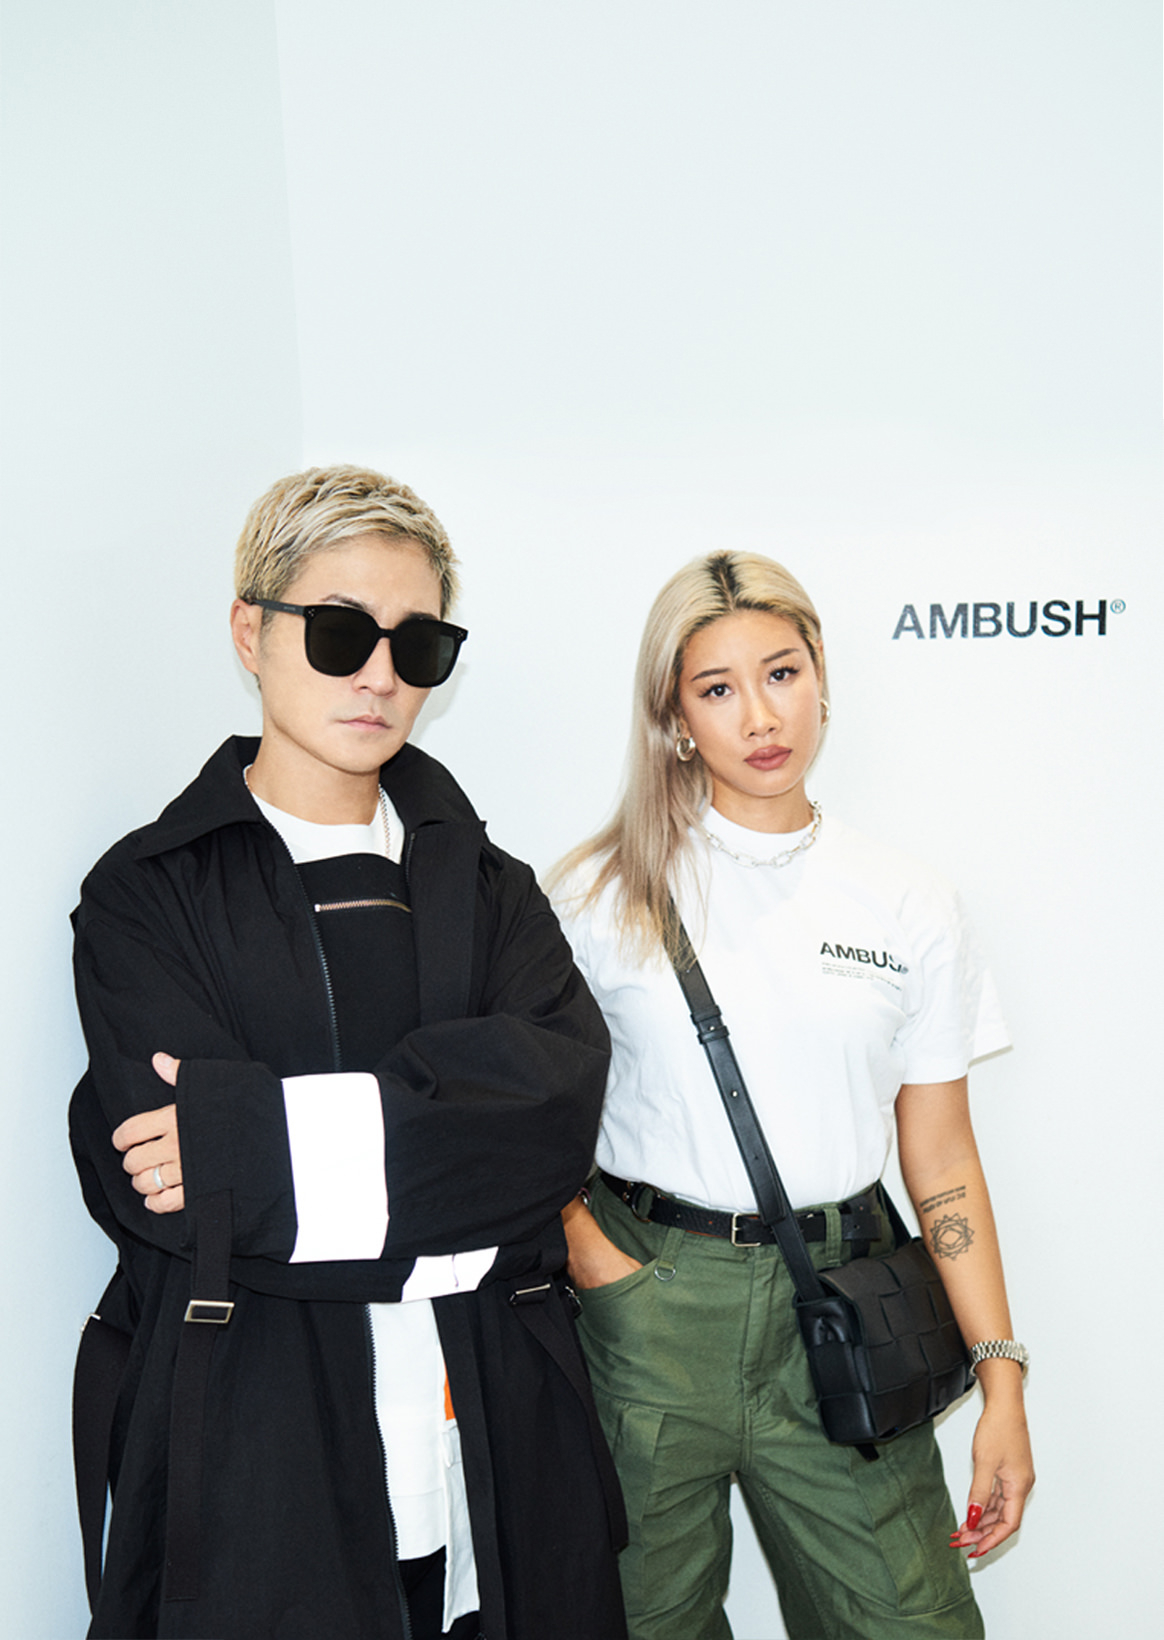 Interview YOON & VERBAL Co-founders of AMBUSH®